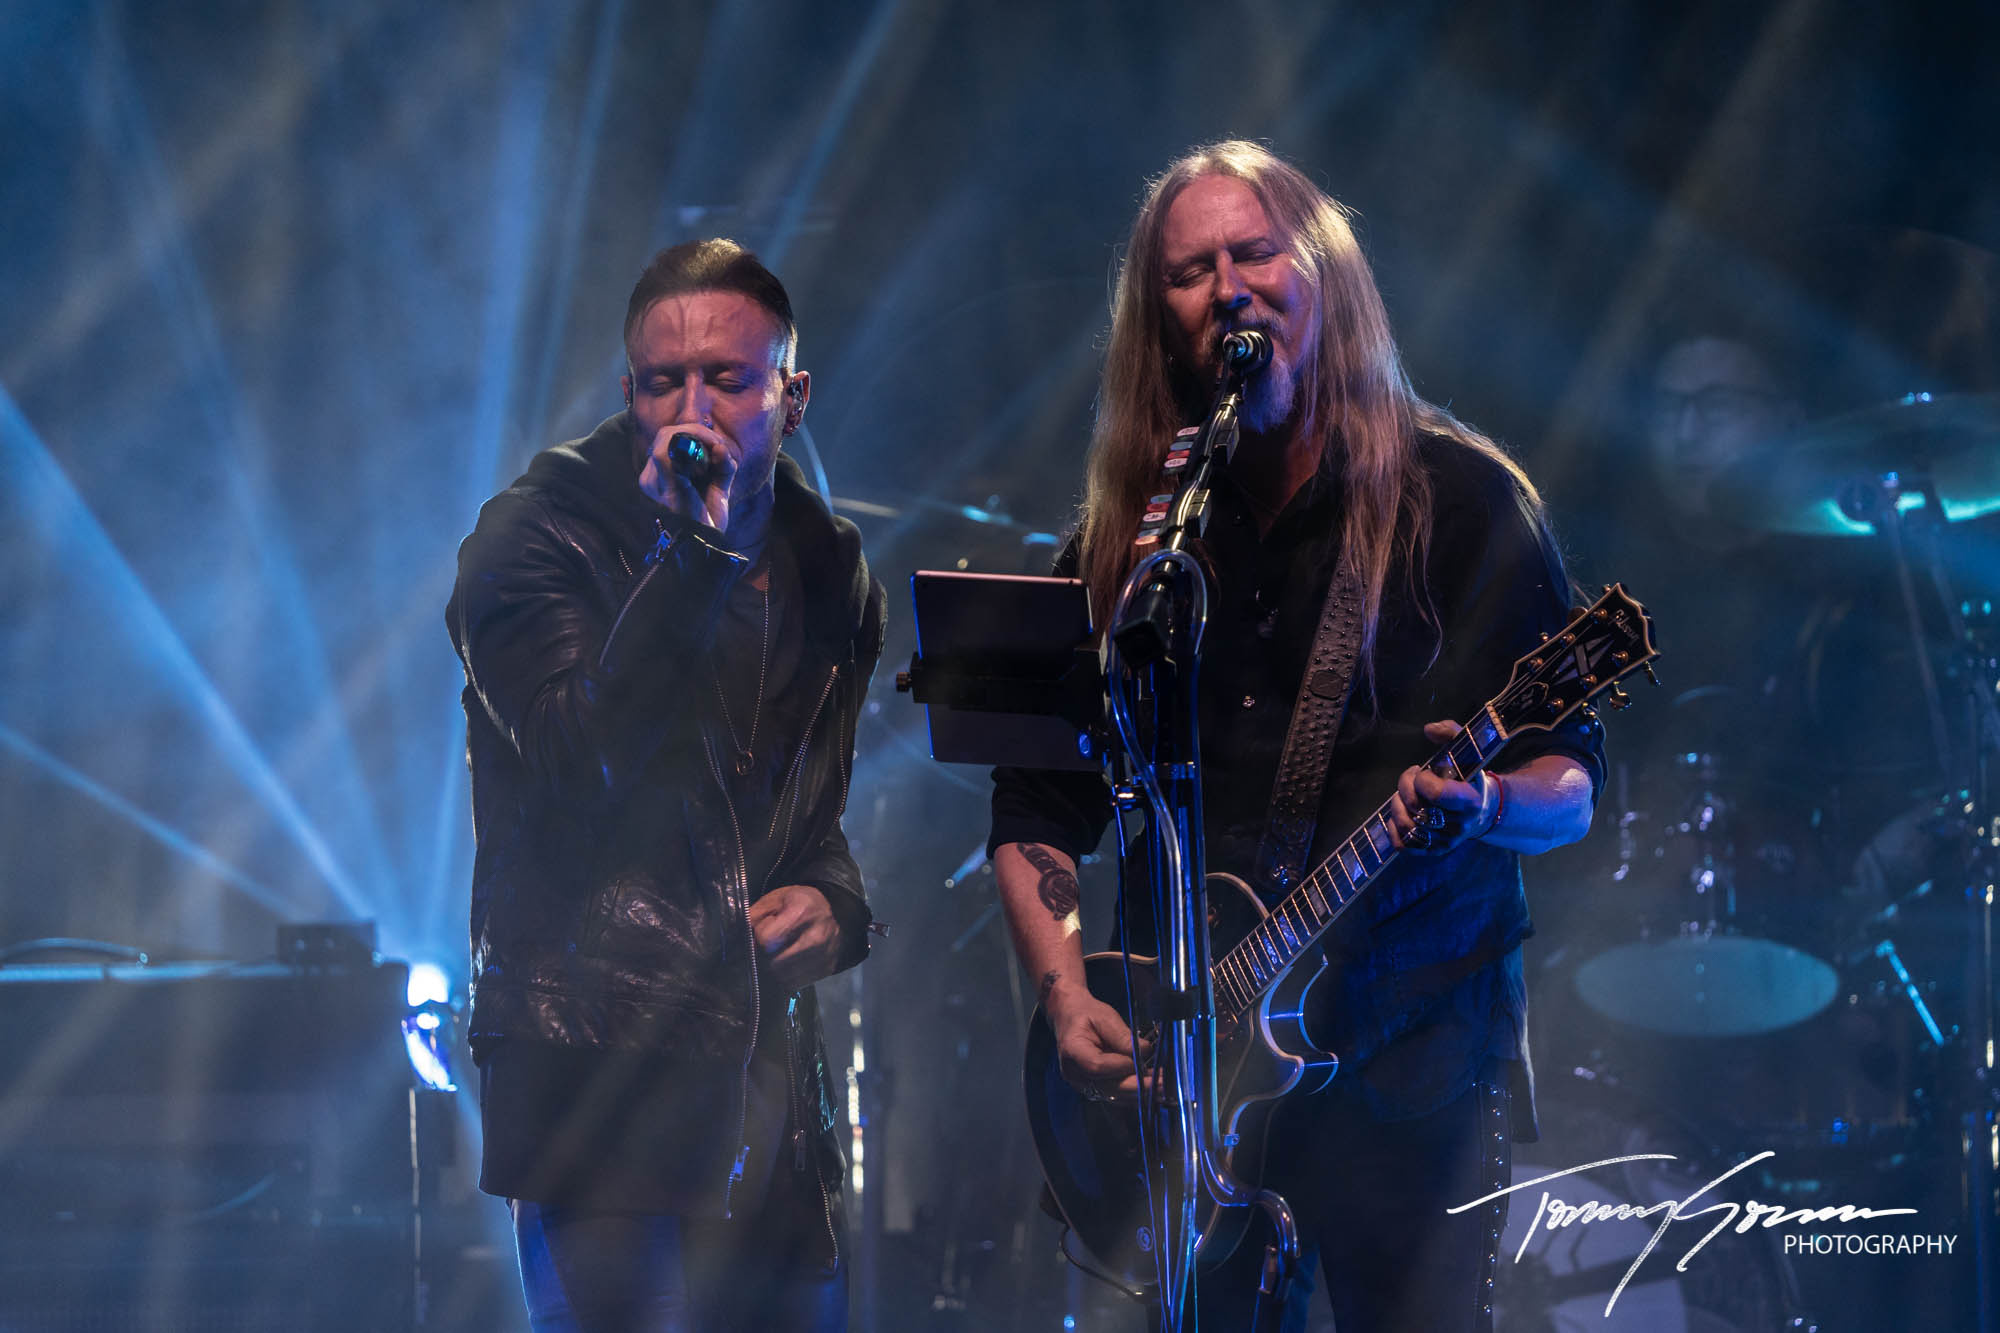 LIVE REVIEW: Jerry Cantrell with special guests Lola Colette, March 24th 2022 - The Rockpit 2000x1340